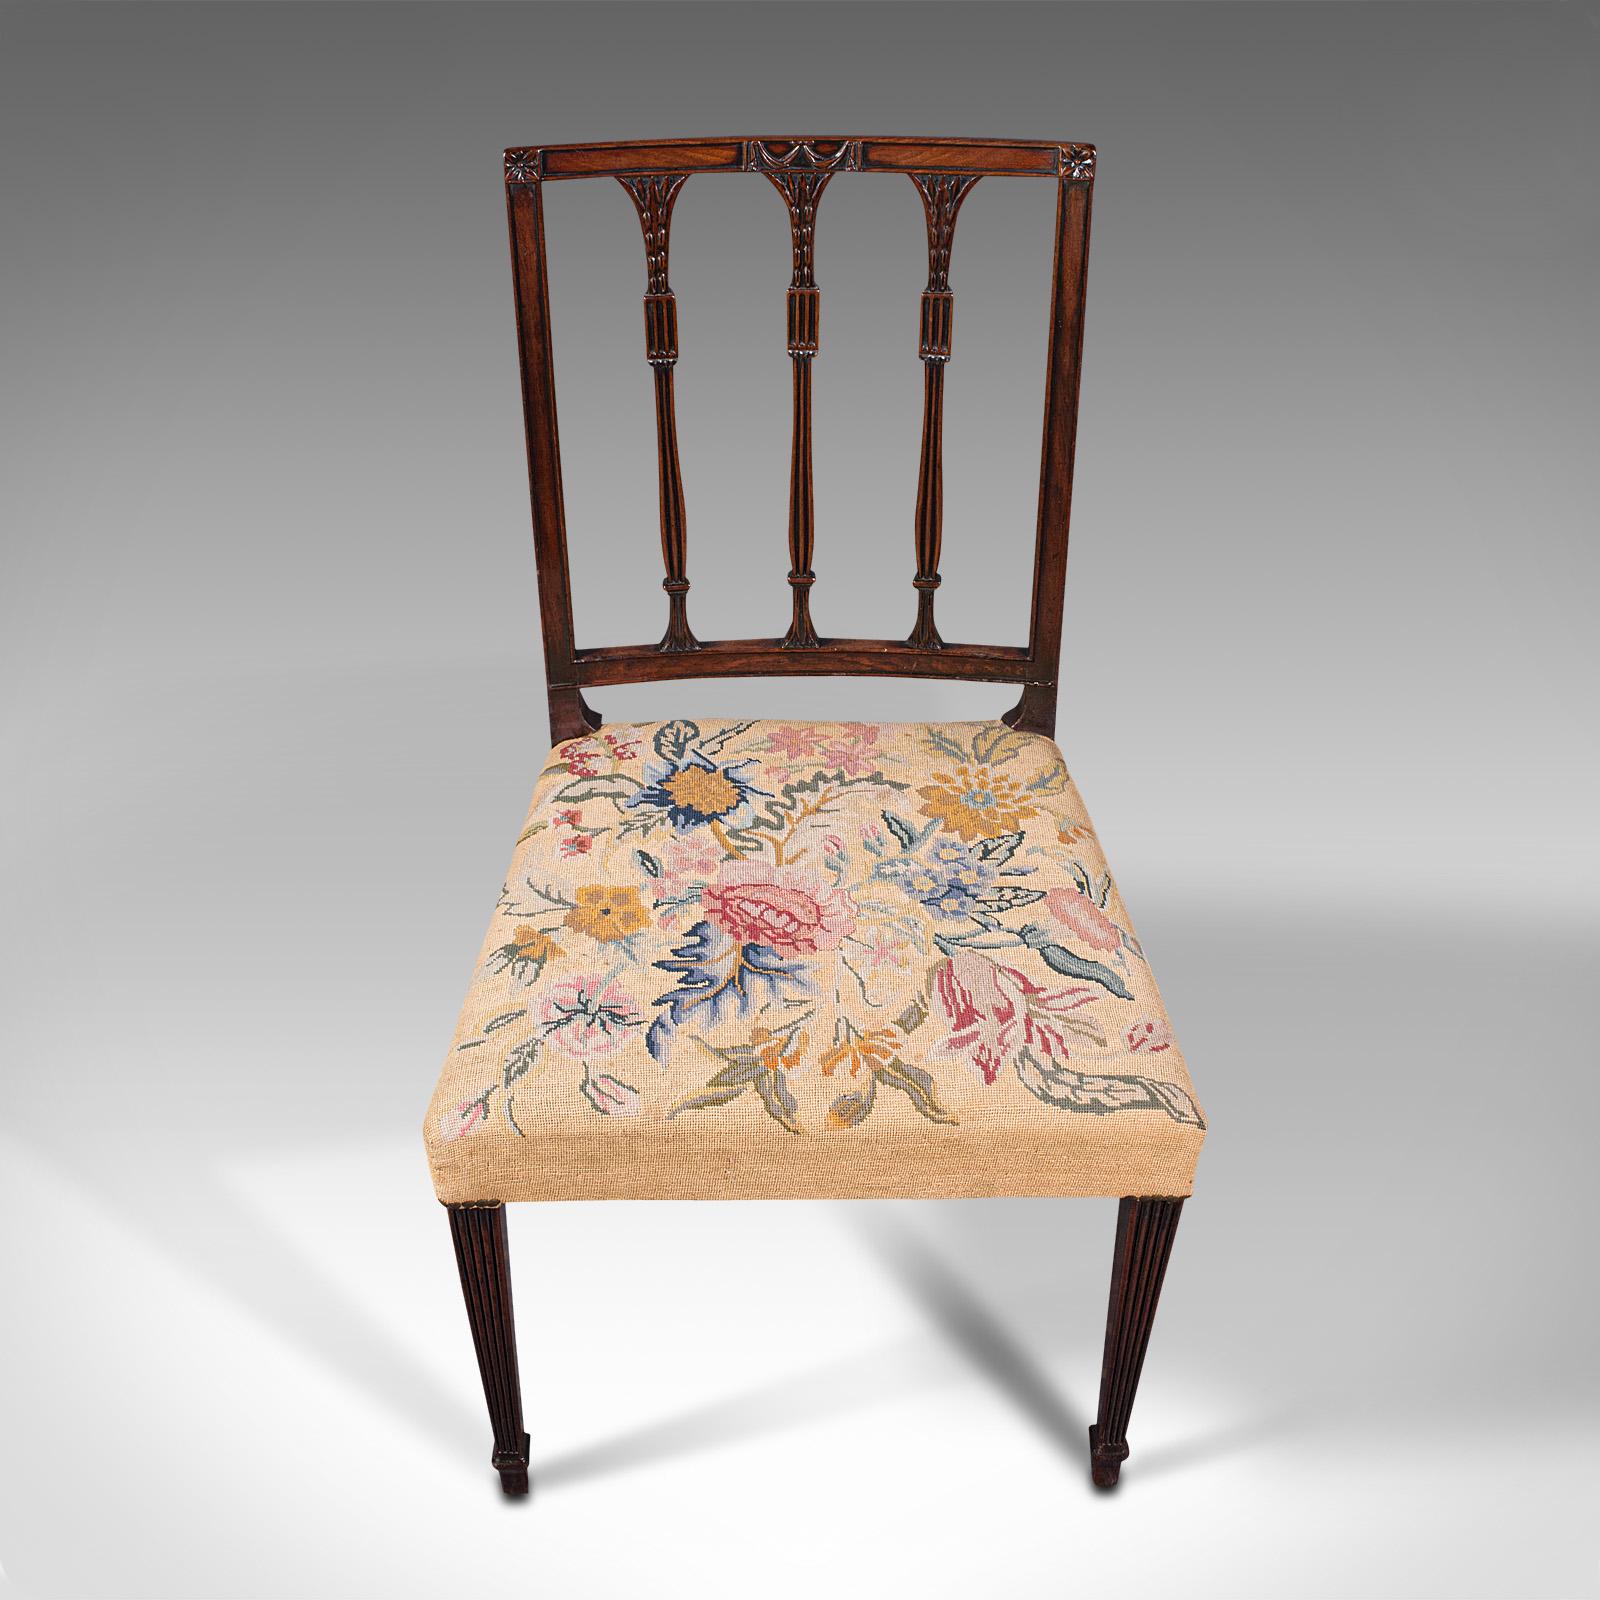 Set of 4 Antique Embroidered Chairs, English, Dining Seat, After Sheraton, 1780 3